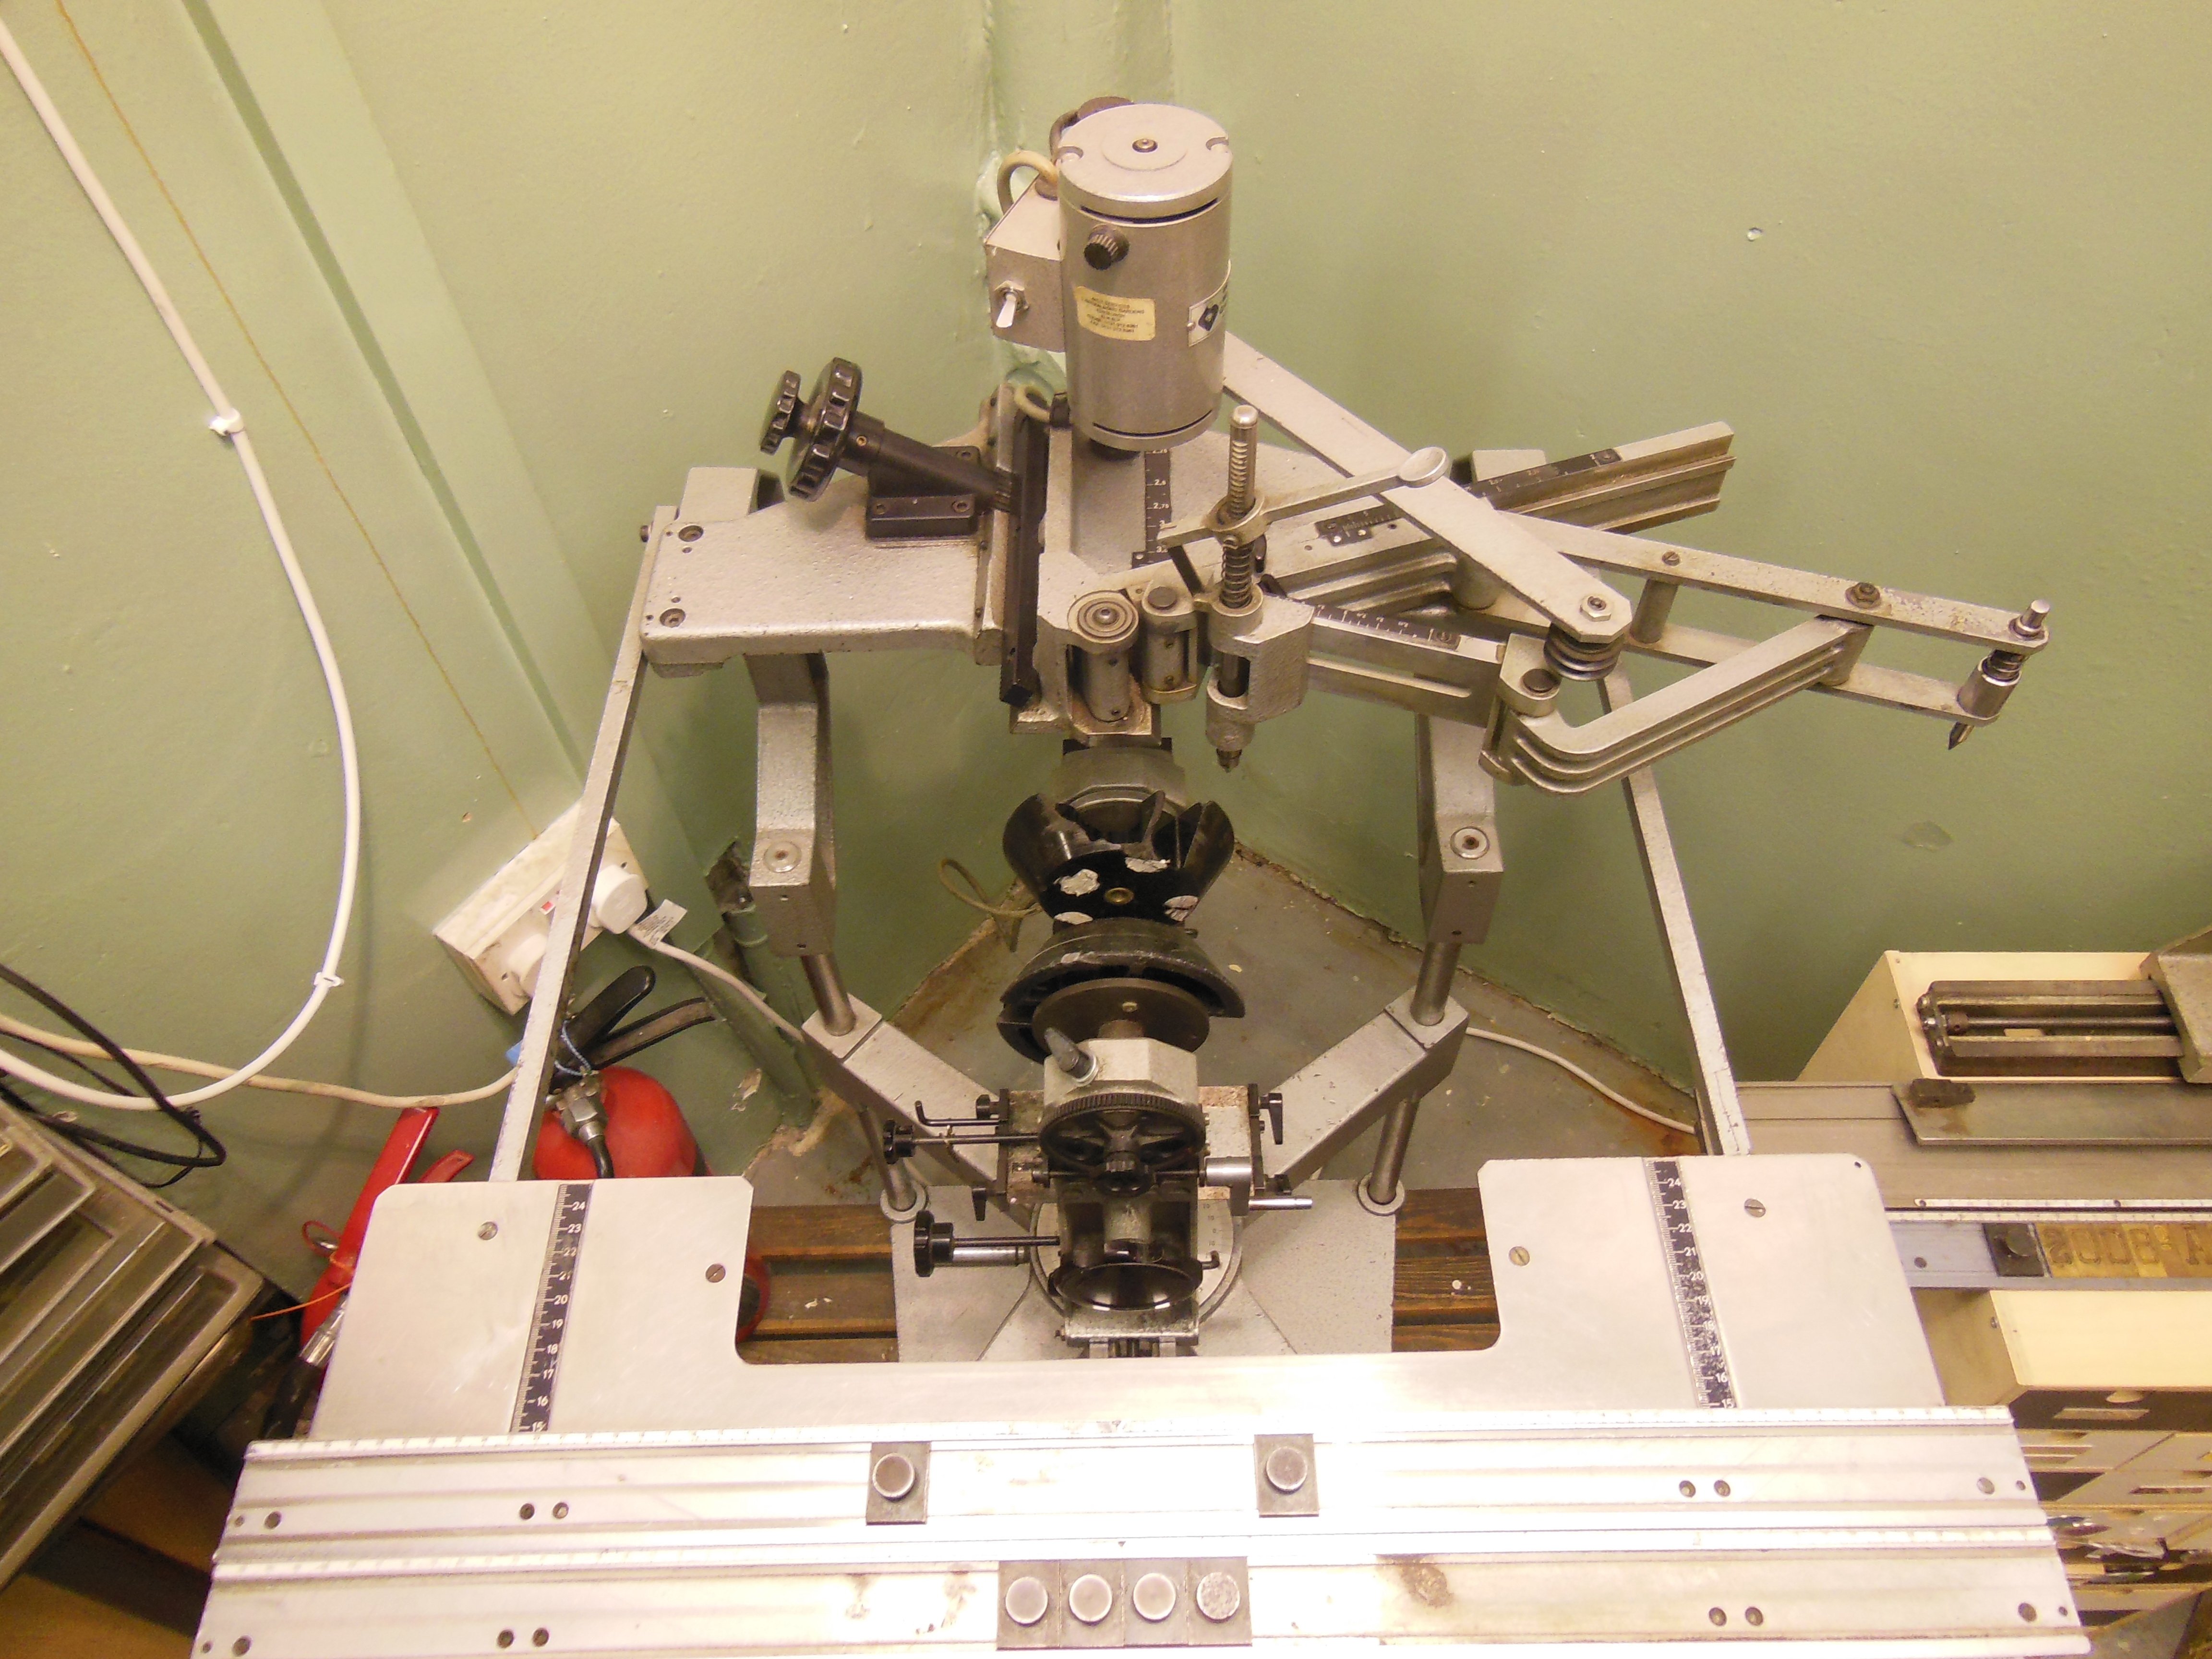 A Gravograph pantograph engraving machine in alpha trophies workshop in leith